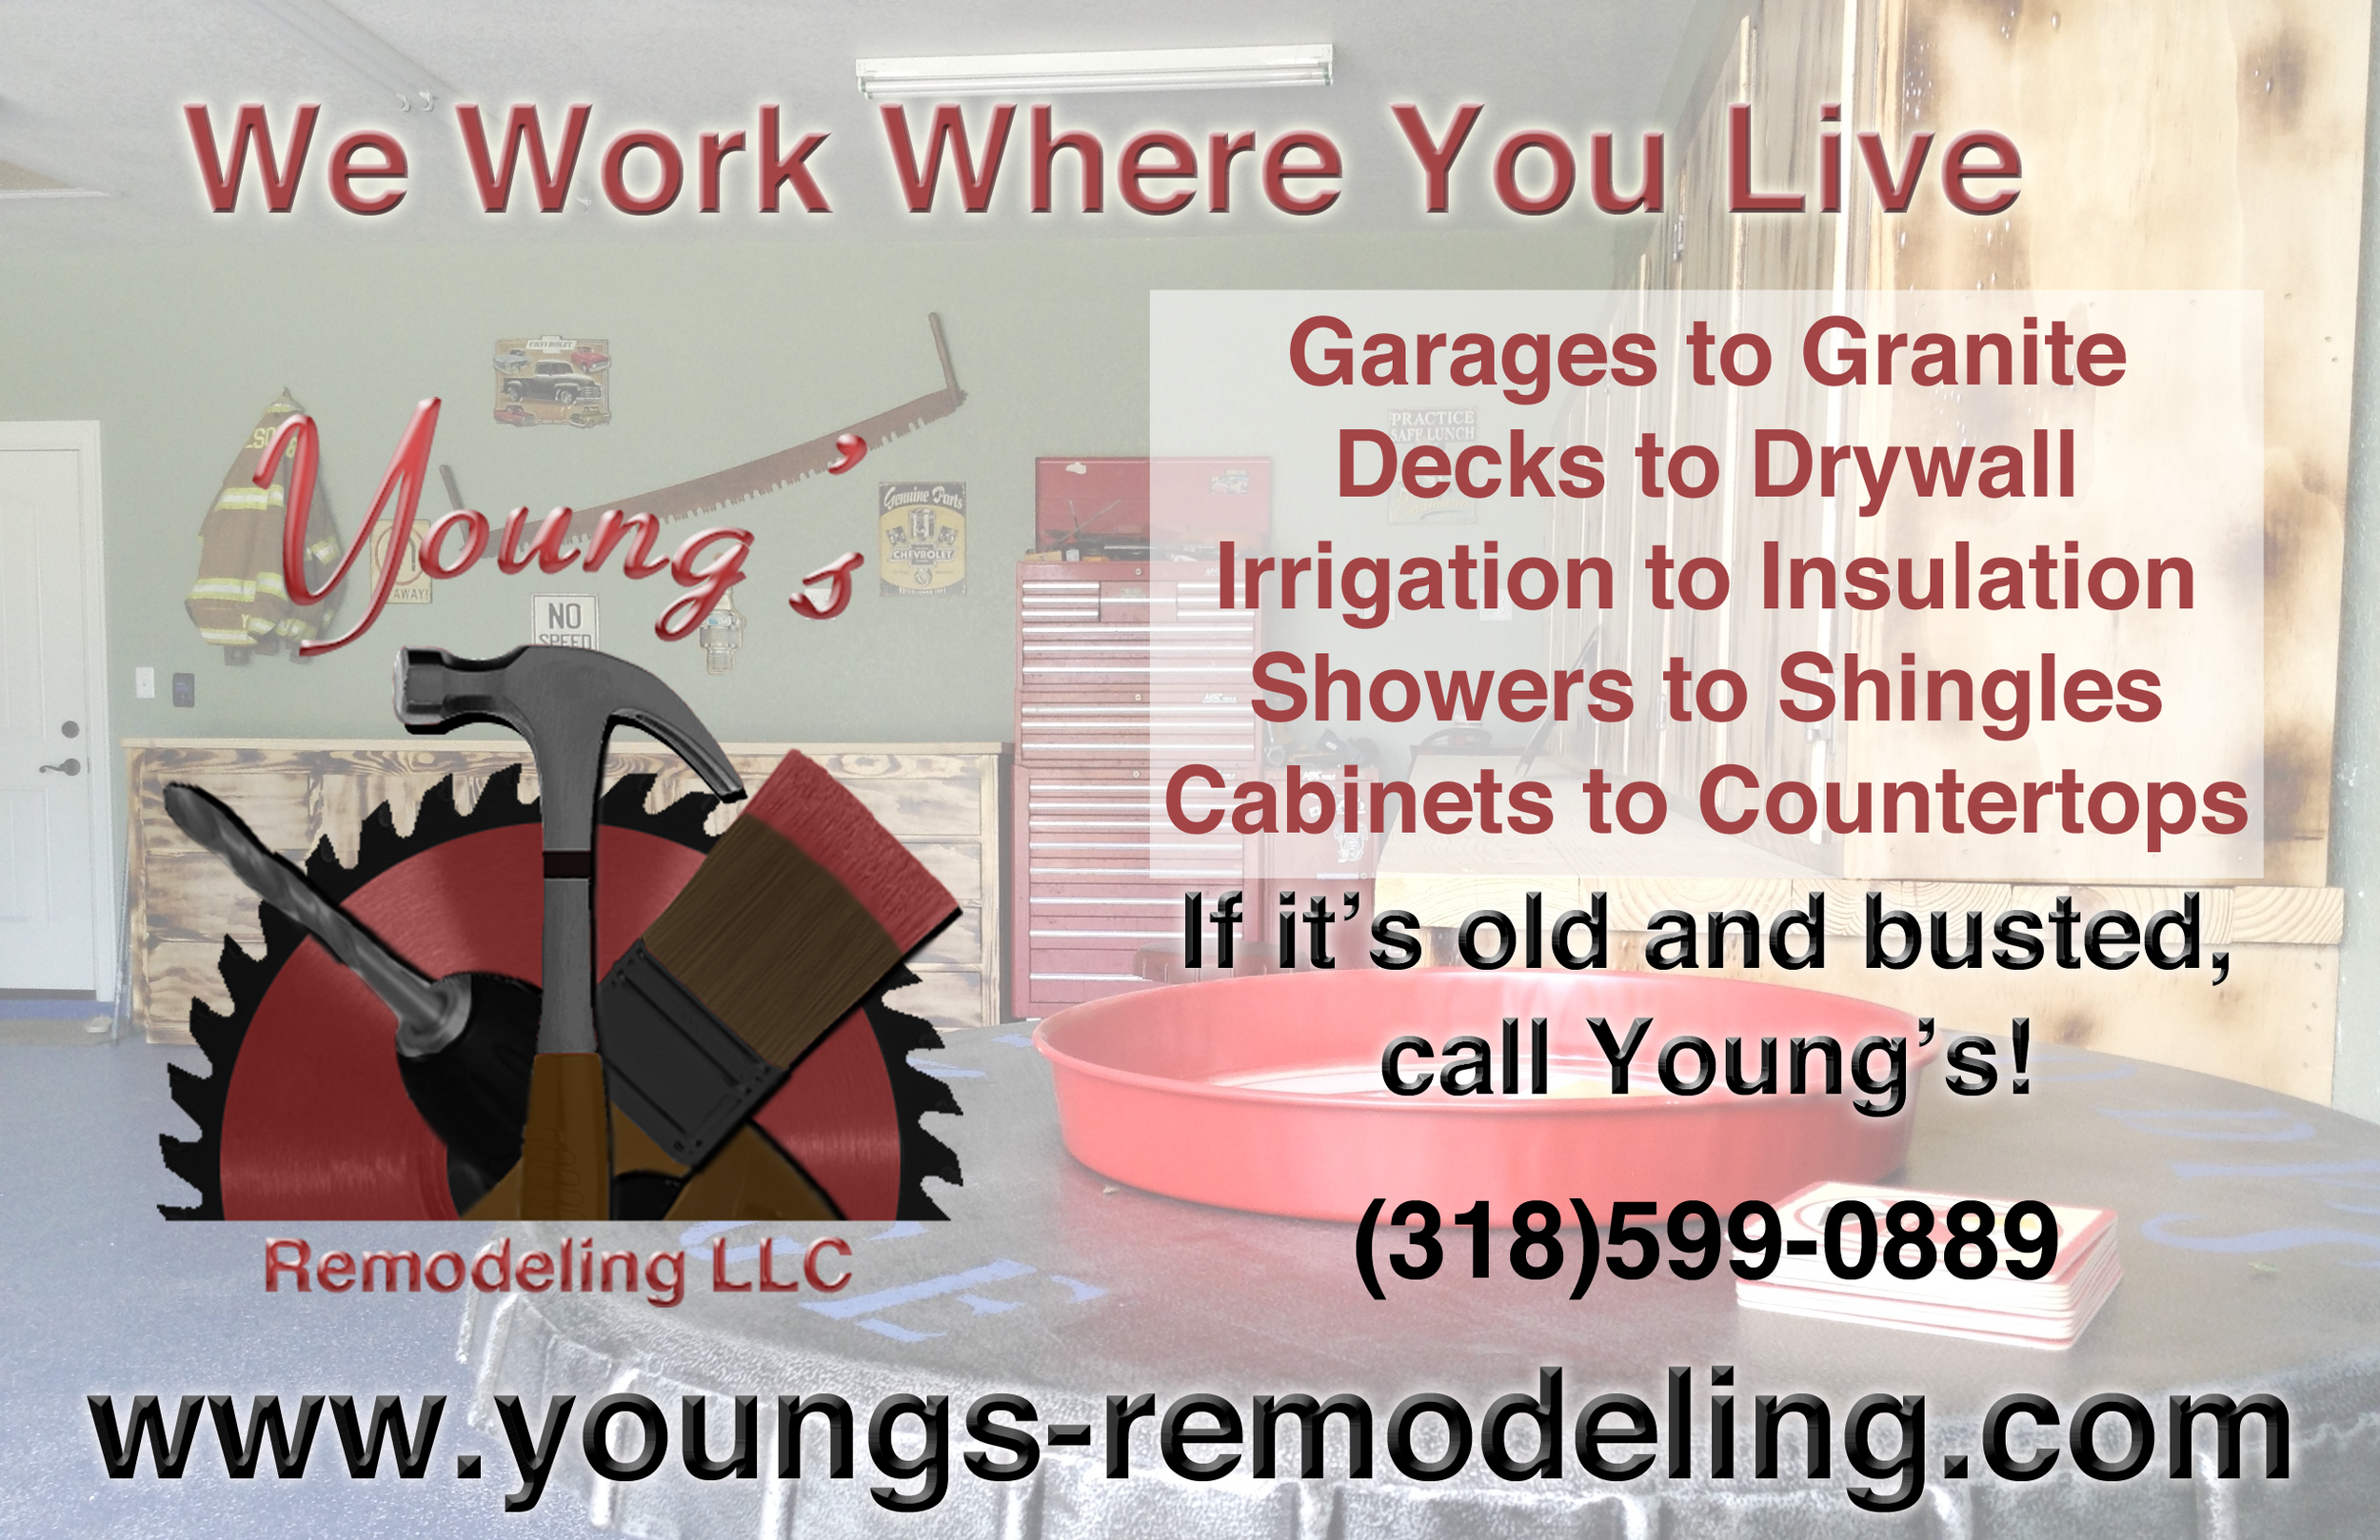 Young's Remodeling Print Ad